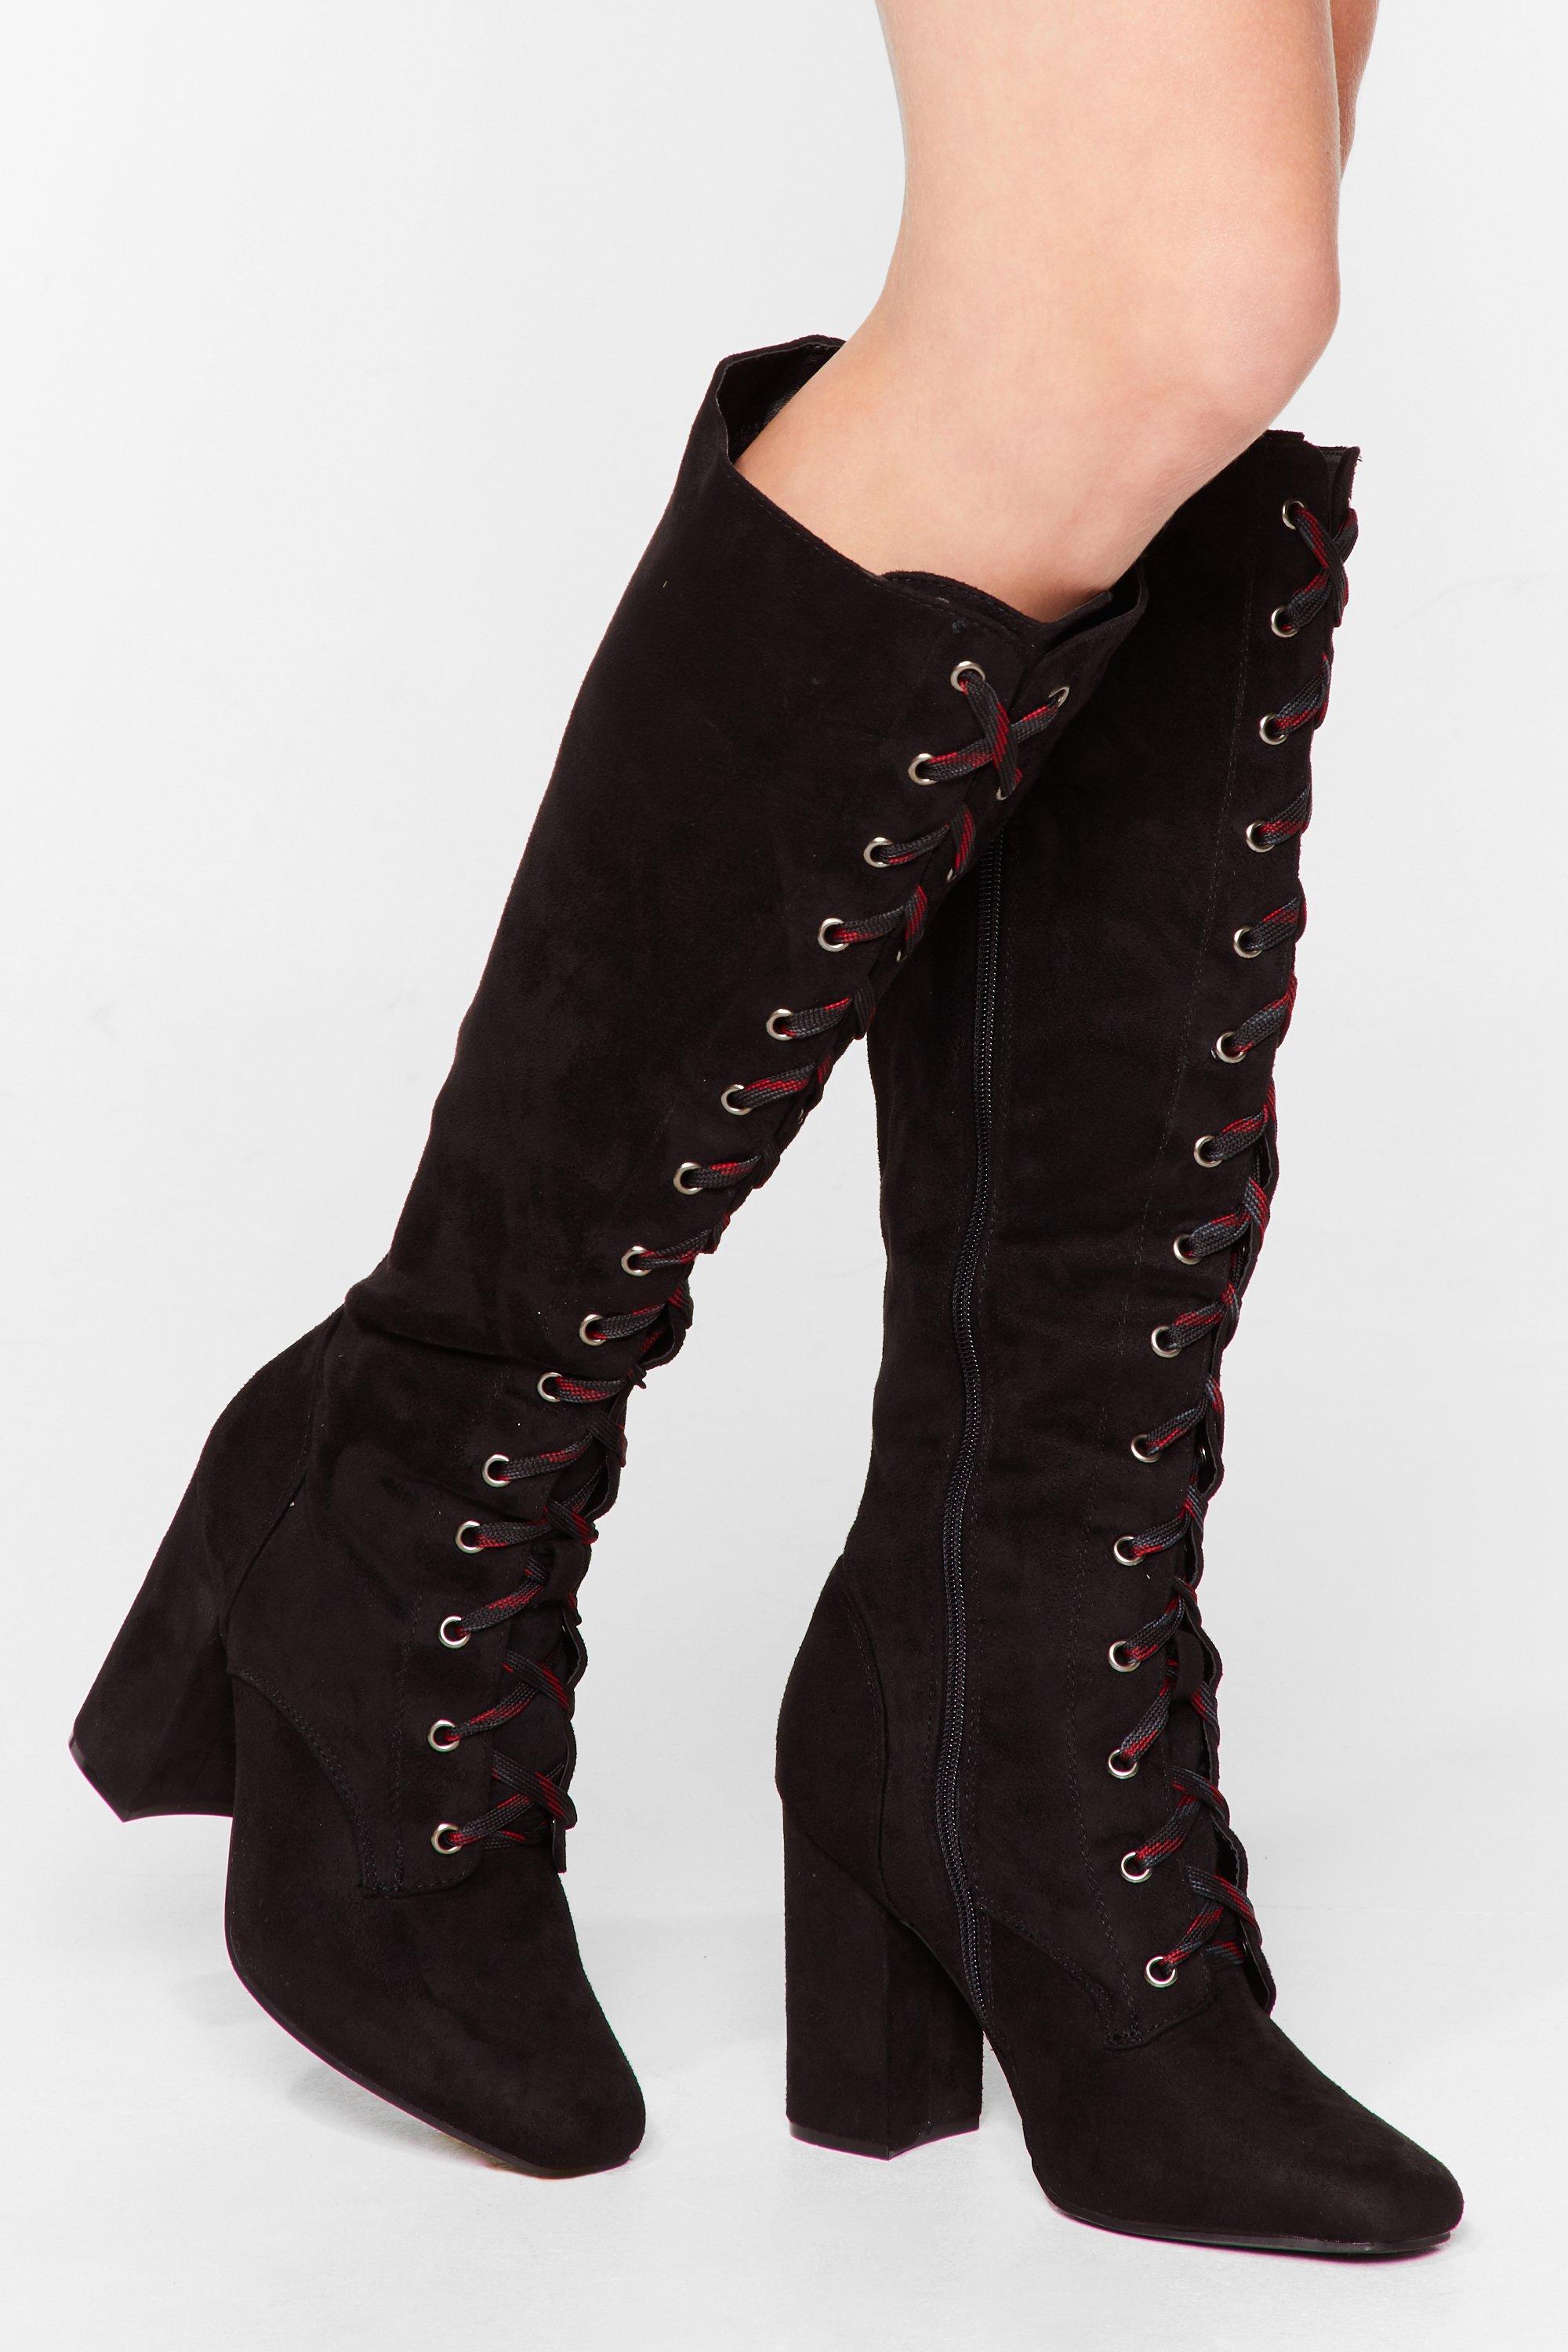 black lace knee high boots